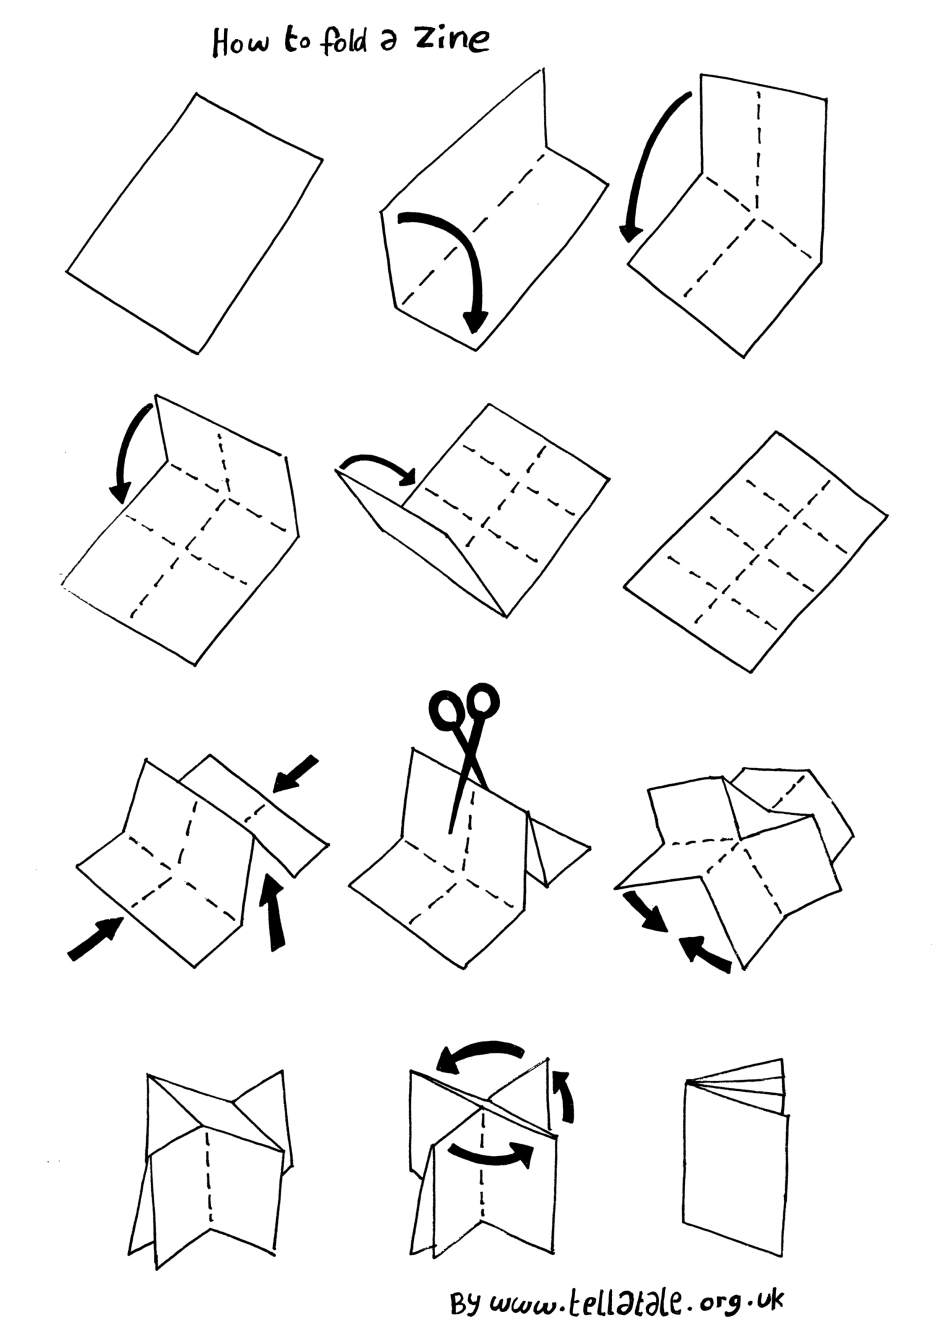 Diagram of how to fold a pocket zine: fold a letter-sized paper into 8 sections, cut down the middle, &fold down the middle.